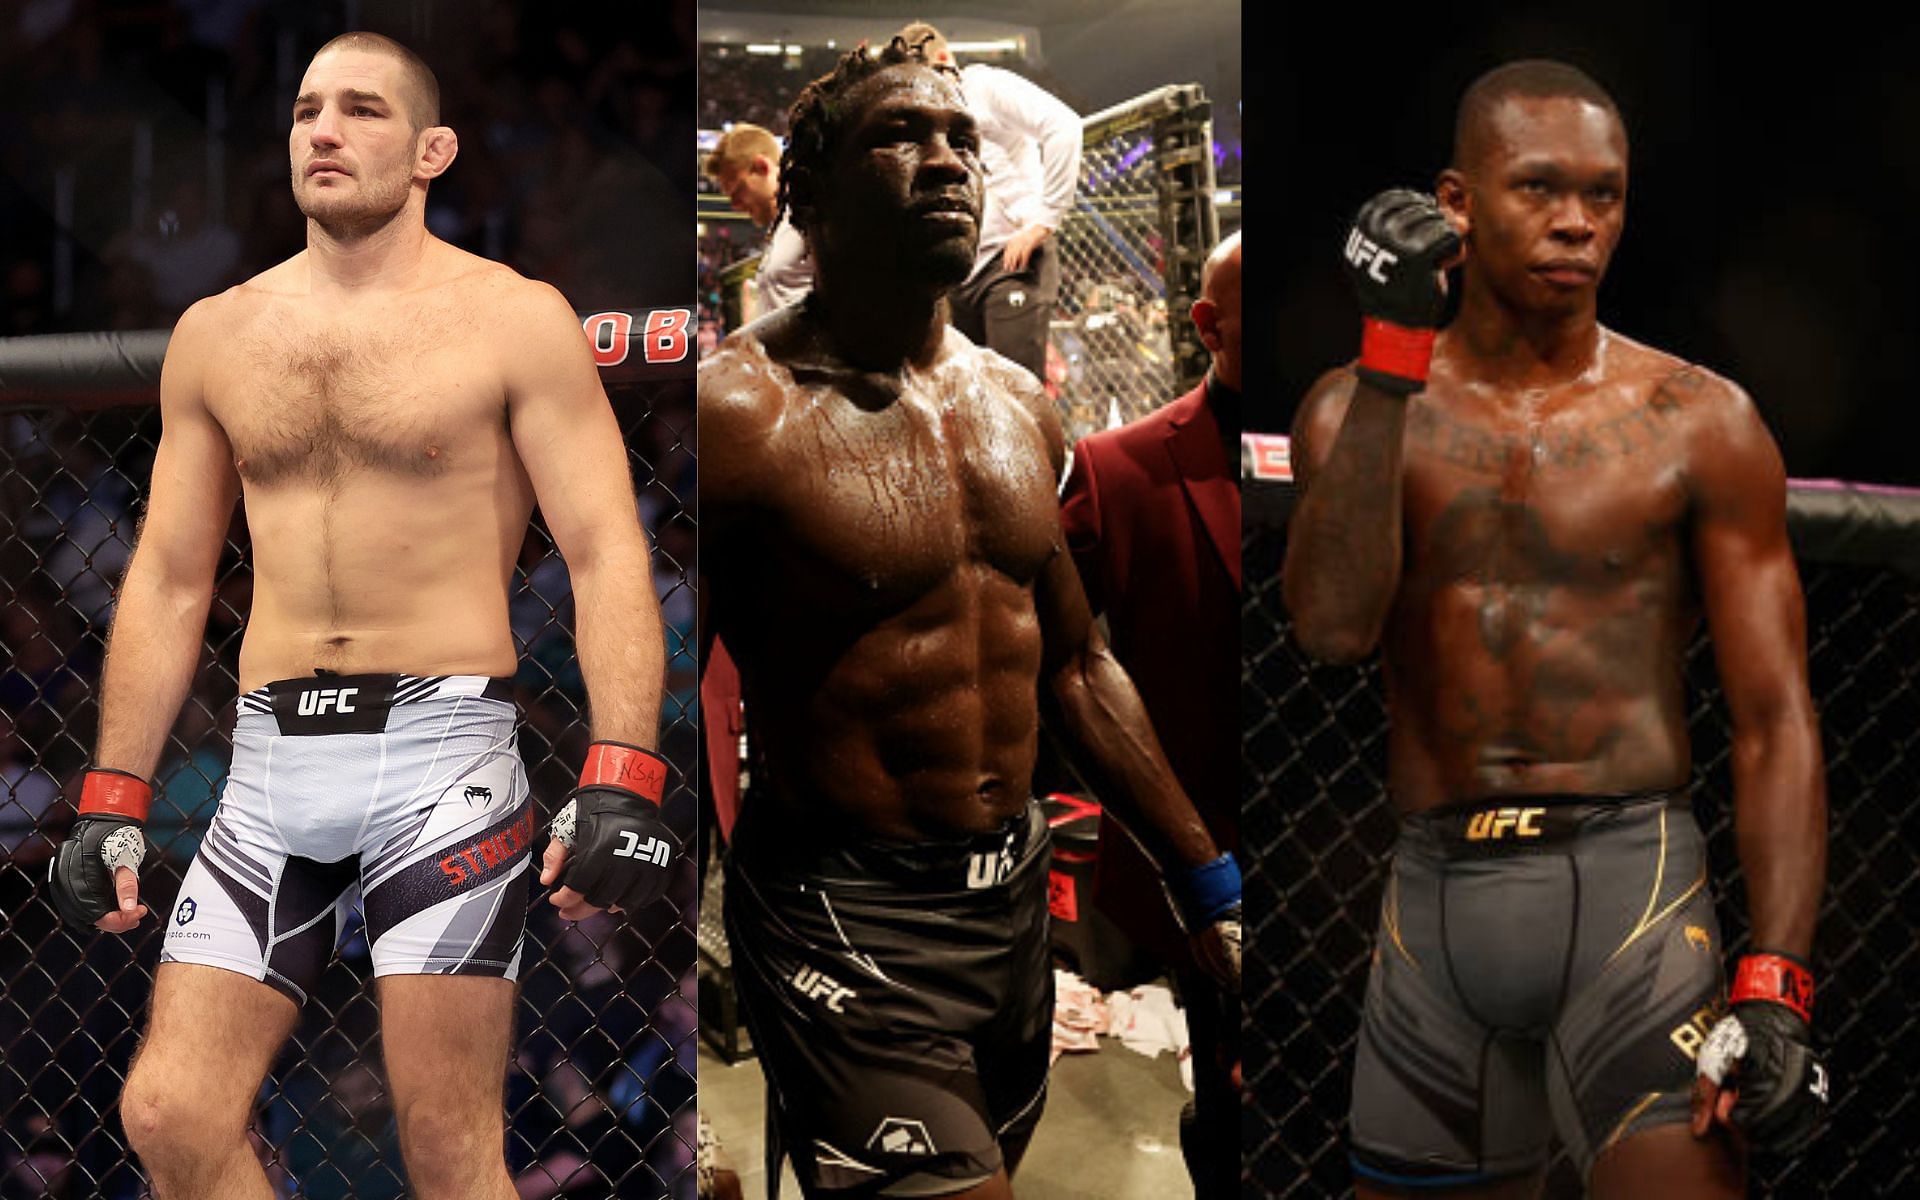 From left to right: Sean Strickland, Jared Cannonier, and Israel Adesanya